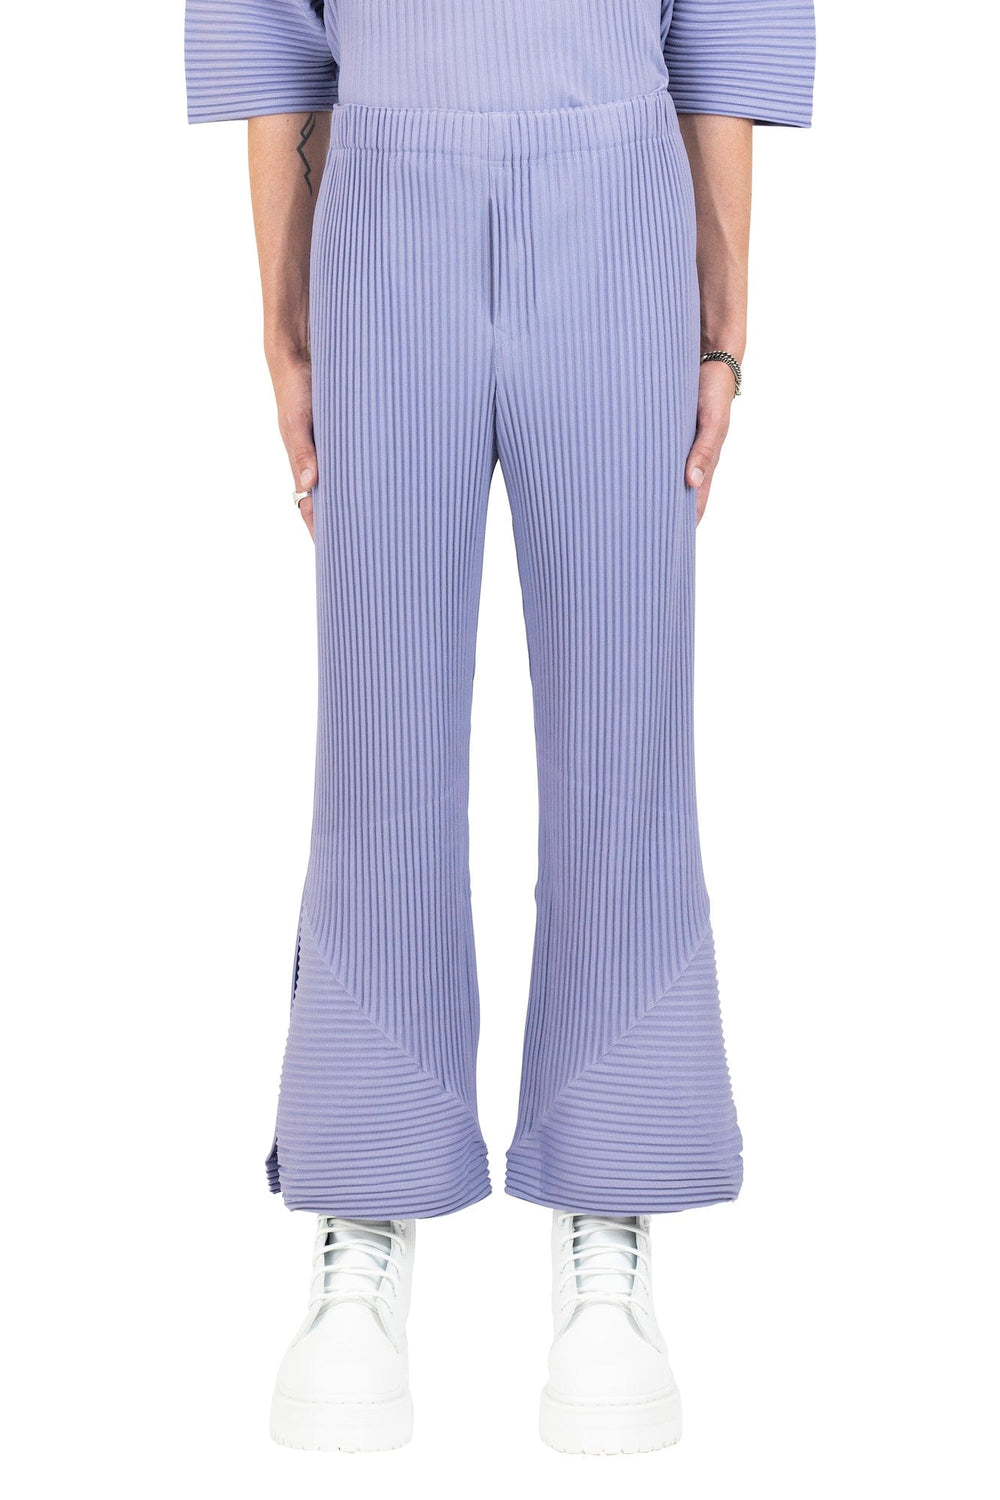 PAUSE Highlights: 12 Ways You Can Style Issey Miyake Pants – PAUSE Online